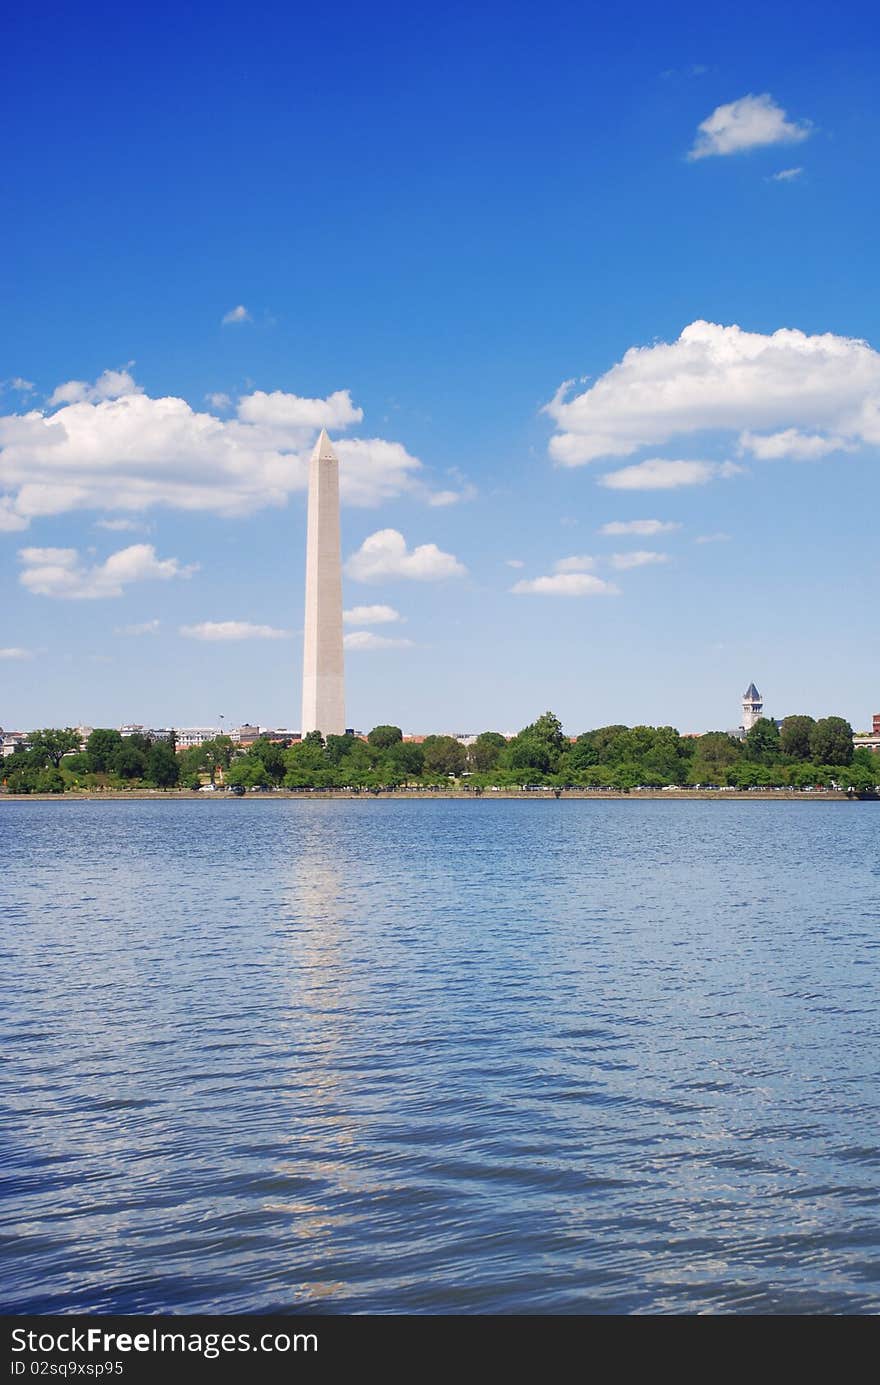 A photo of the Washington Monument over the Tidal Basin water reservoir in the city of Washington D.C.